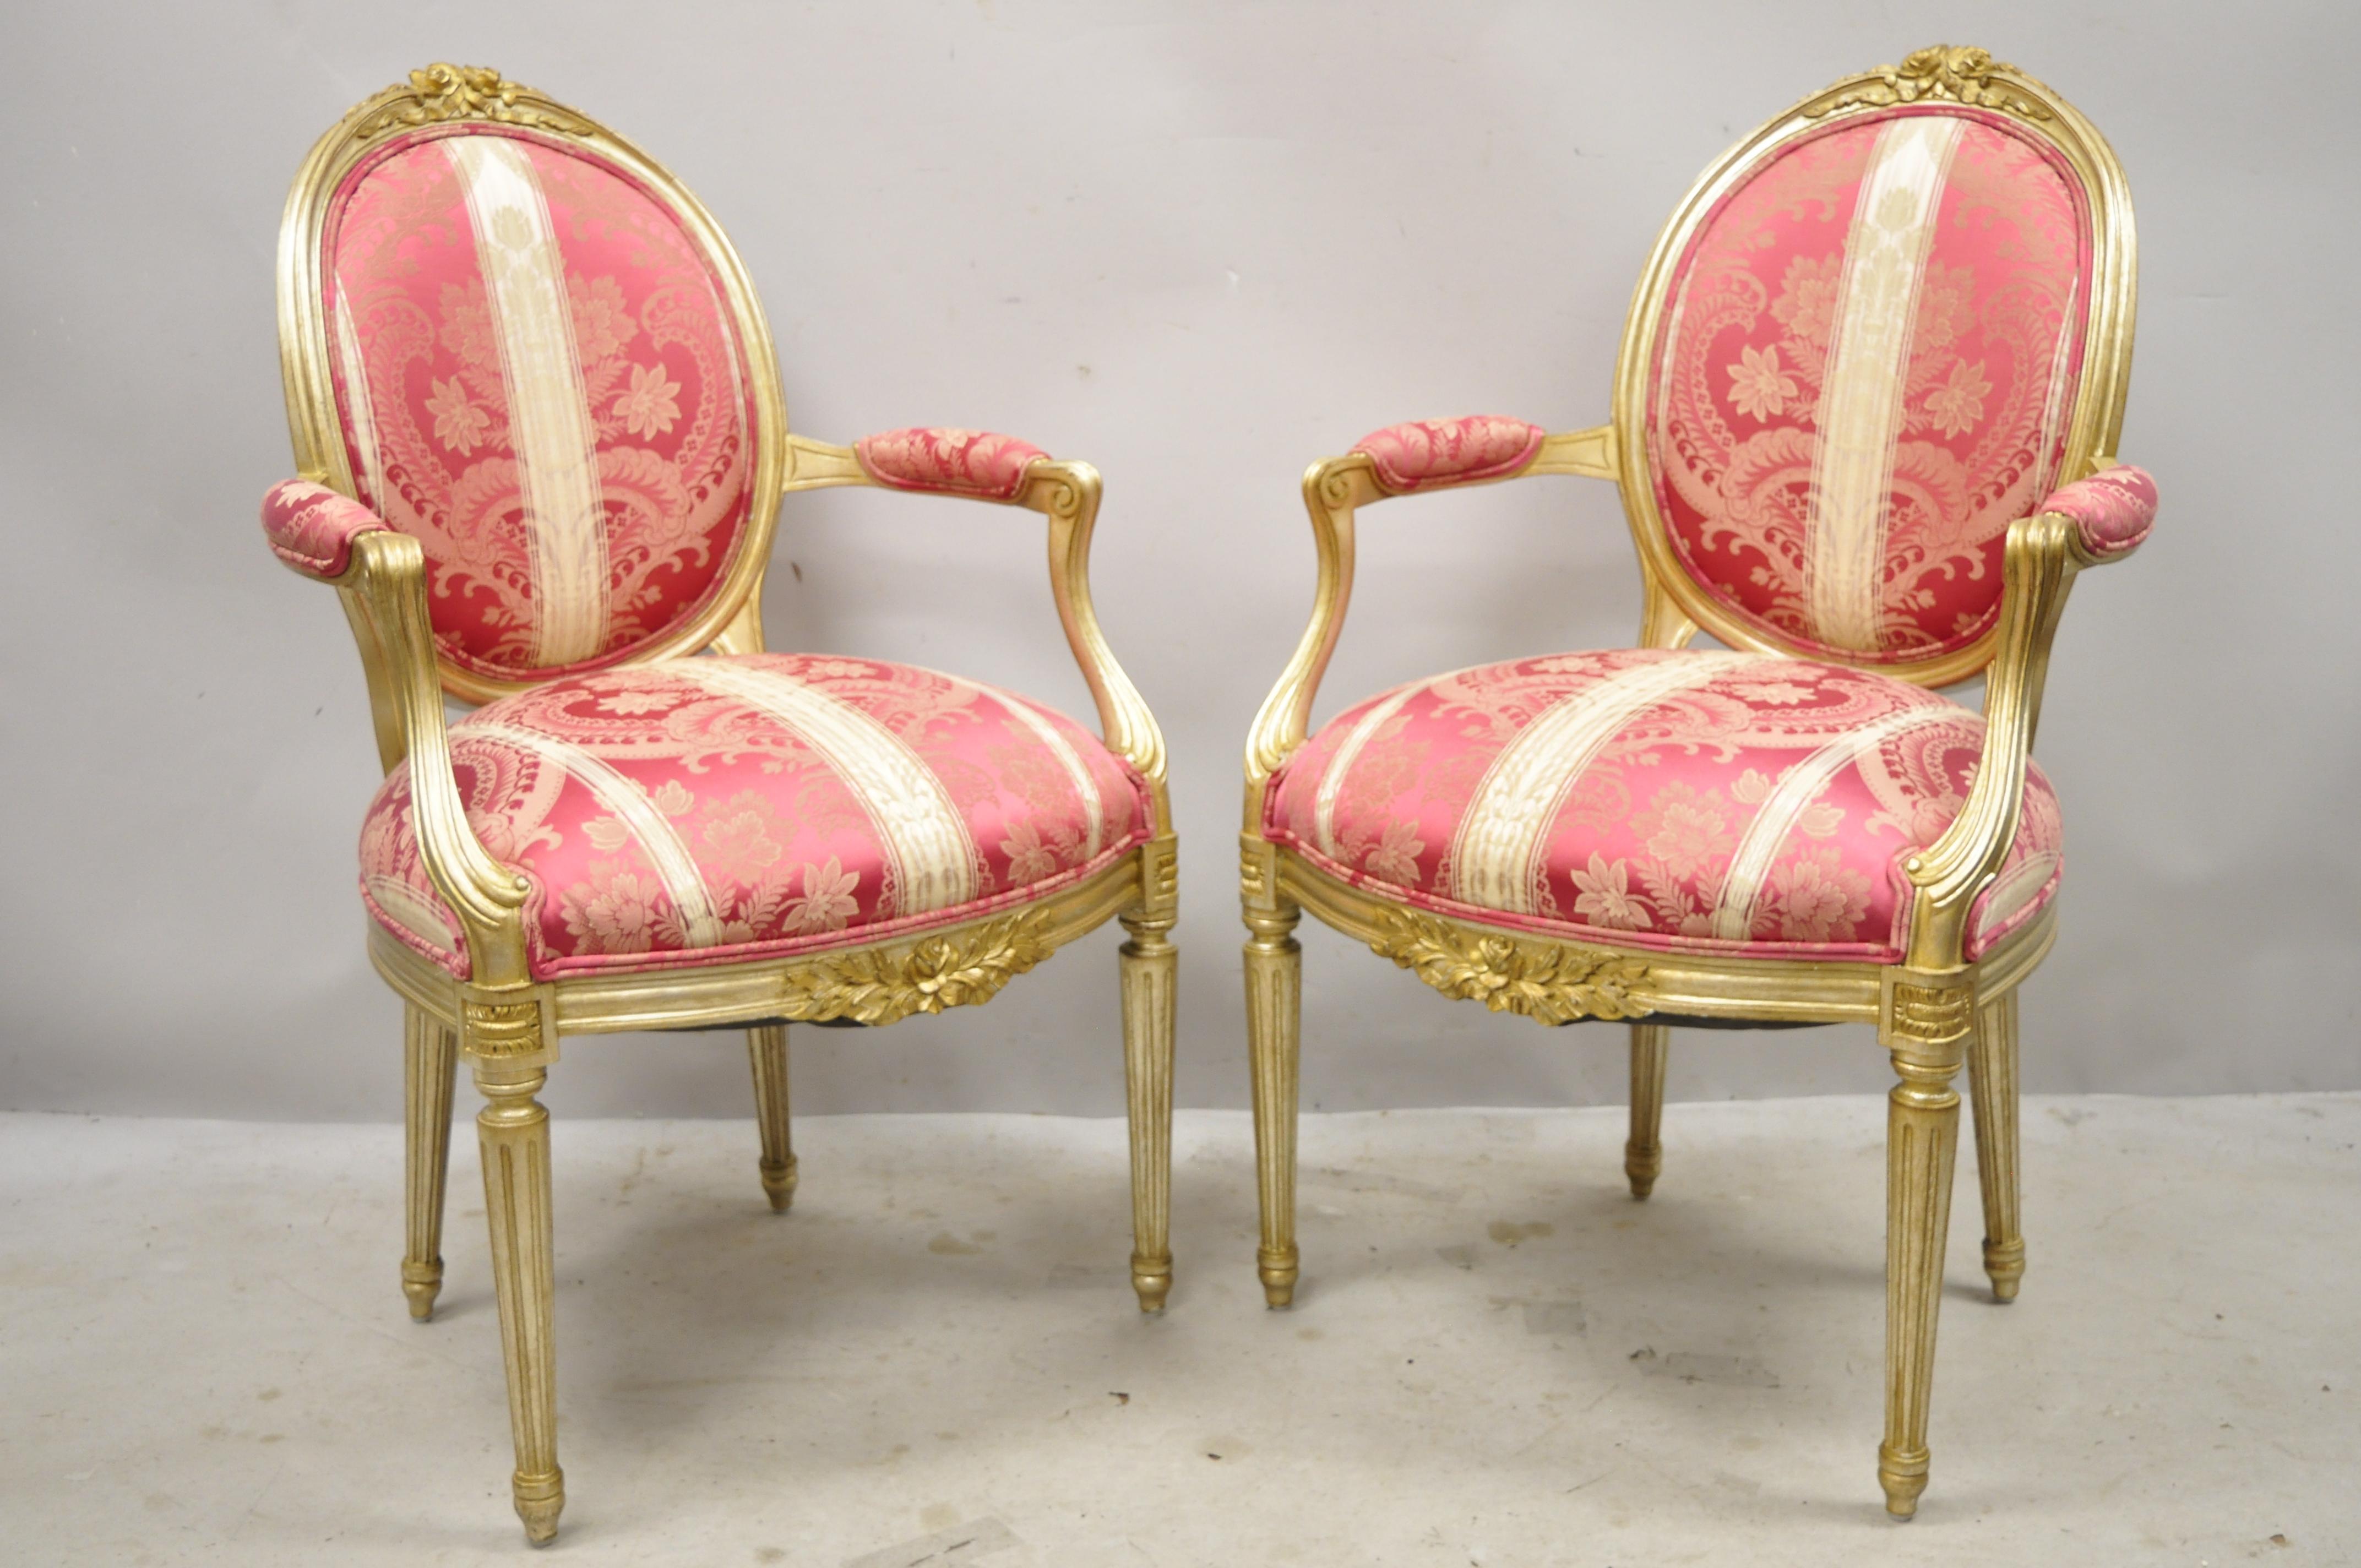 French Louis XVI style silver and gold gilt pink damask oval medallion back arm chairs - a pair. ***Listing is for (1) Pair. Currently (3) Pair available*** Item features silver/gold gilt finish, burgundy velvet upholstered rear backrests, pink